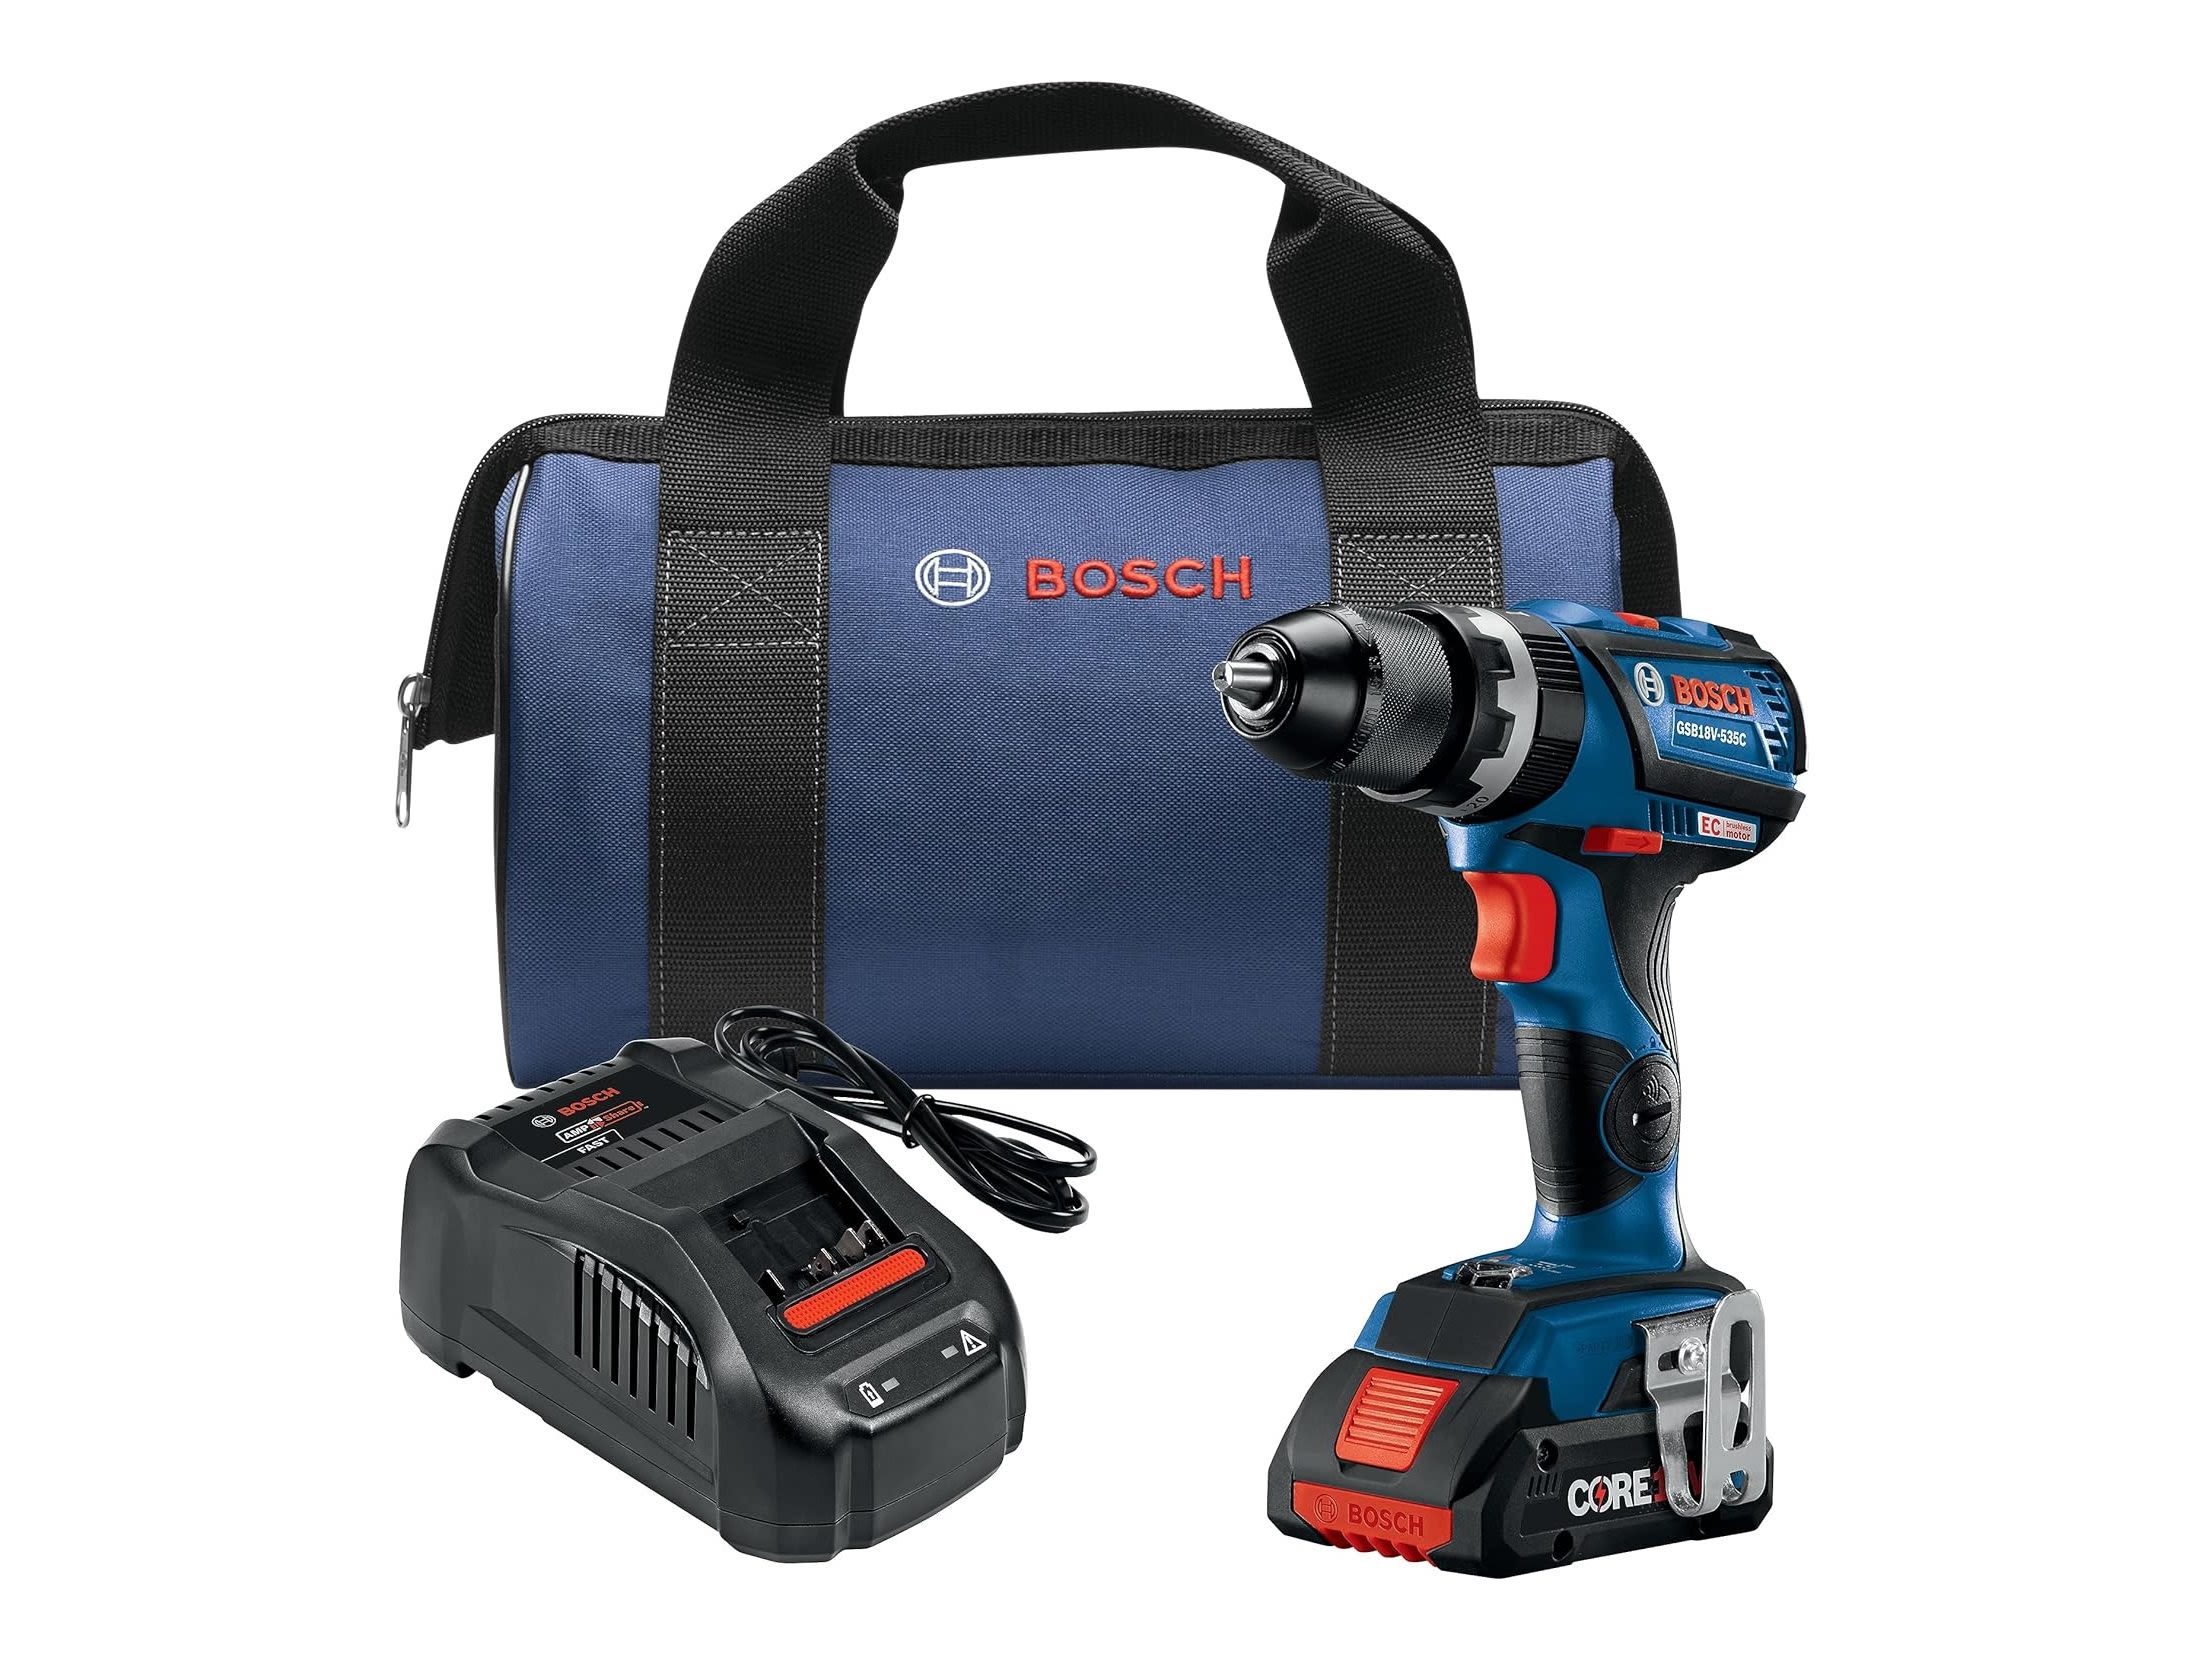 Pricey Bosch brushless drill and driver kit just $99 on Prime Day